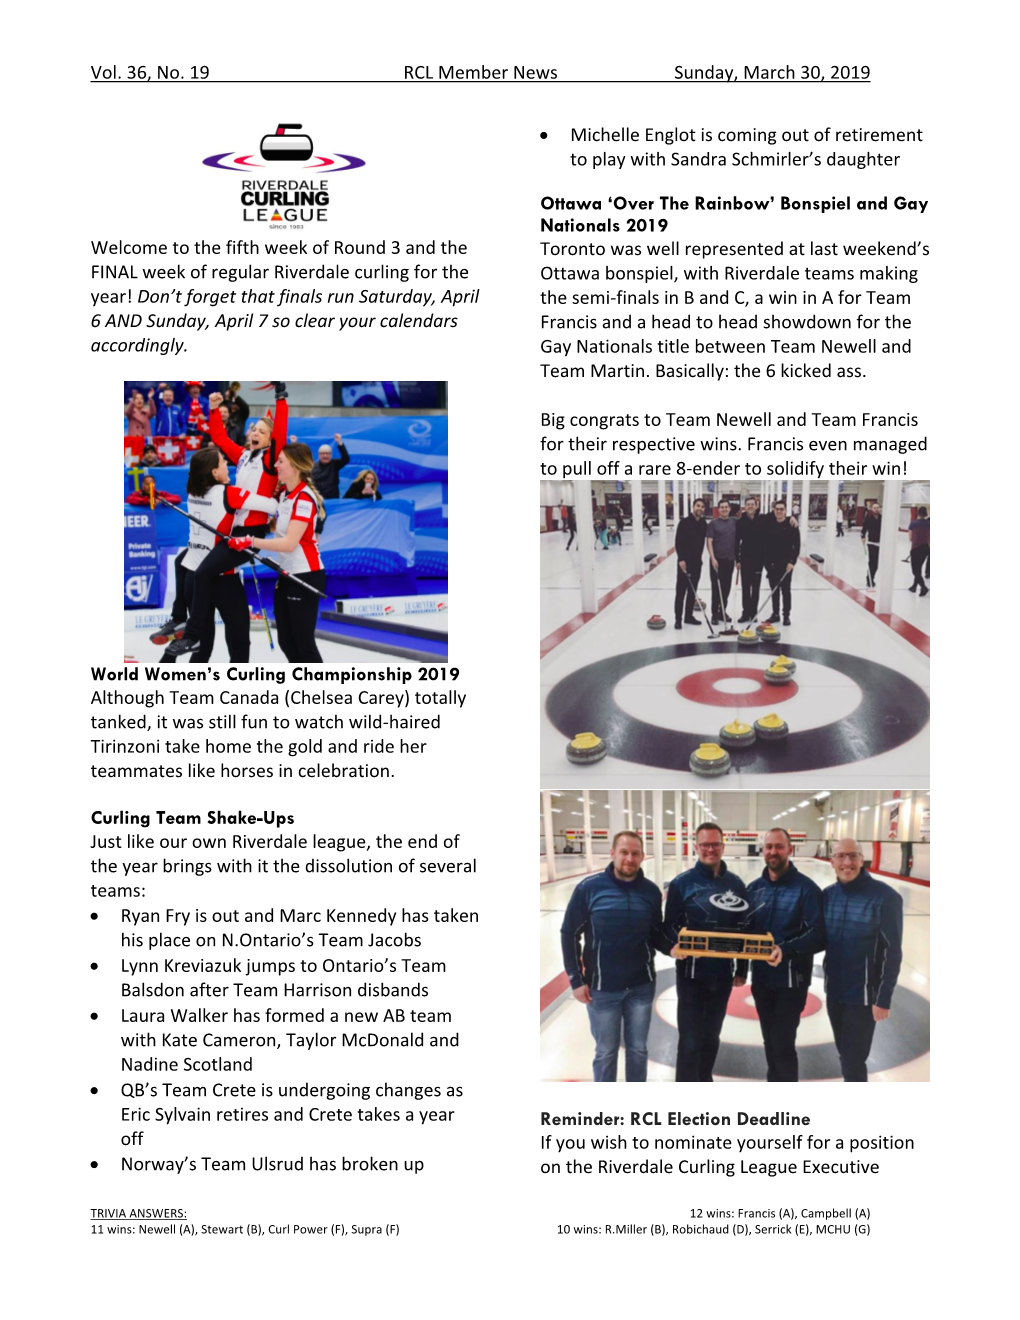 Vol. 36, No. 19 RCL Member News Sunday, March 30, 2019 Welcome to the Fifth Week of Round 3 and the FINAL Week of Regular Riverd